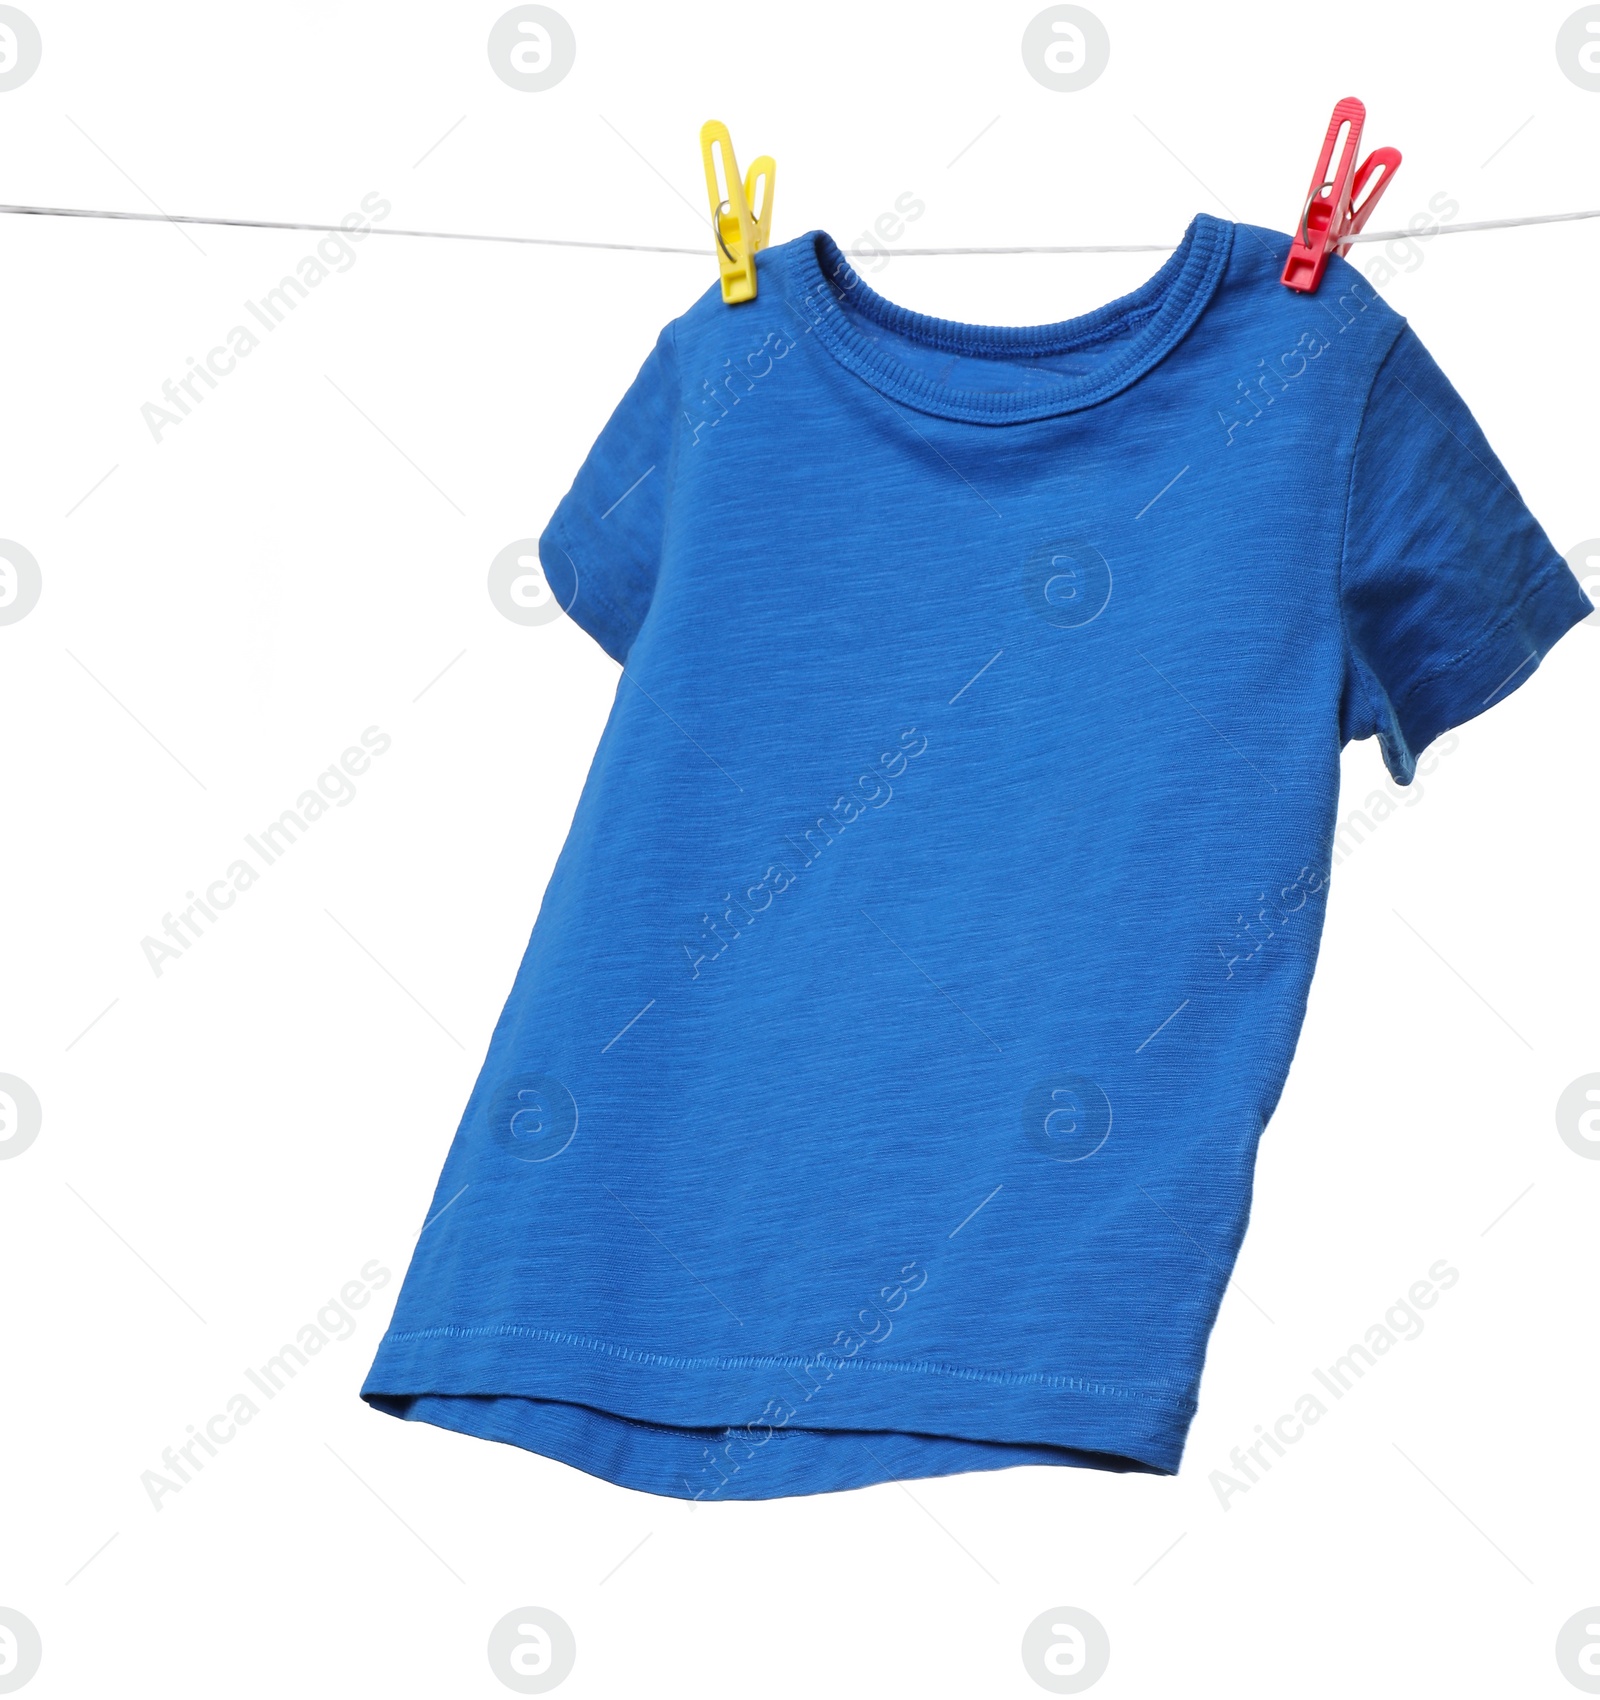 Photo of One blue t-shirt drying on washing line isolated on white